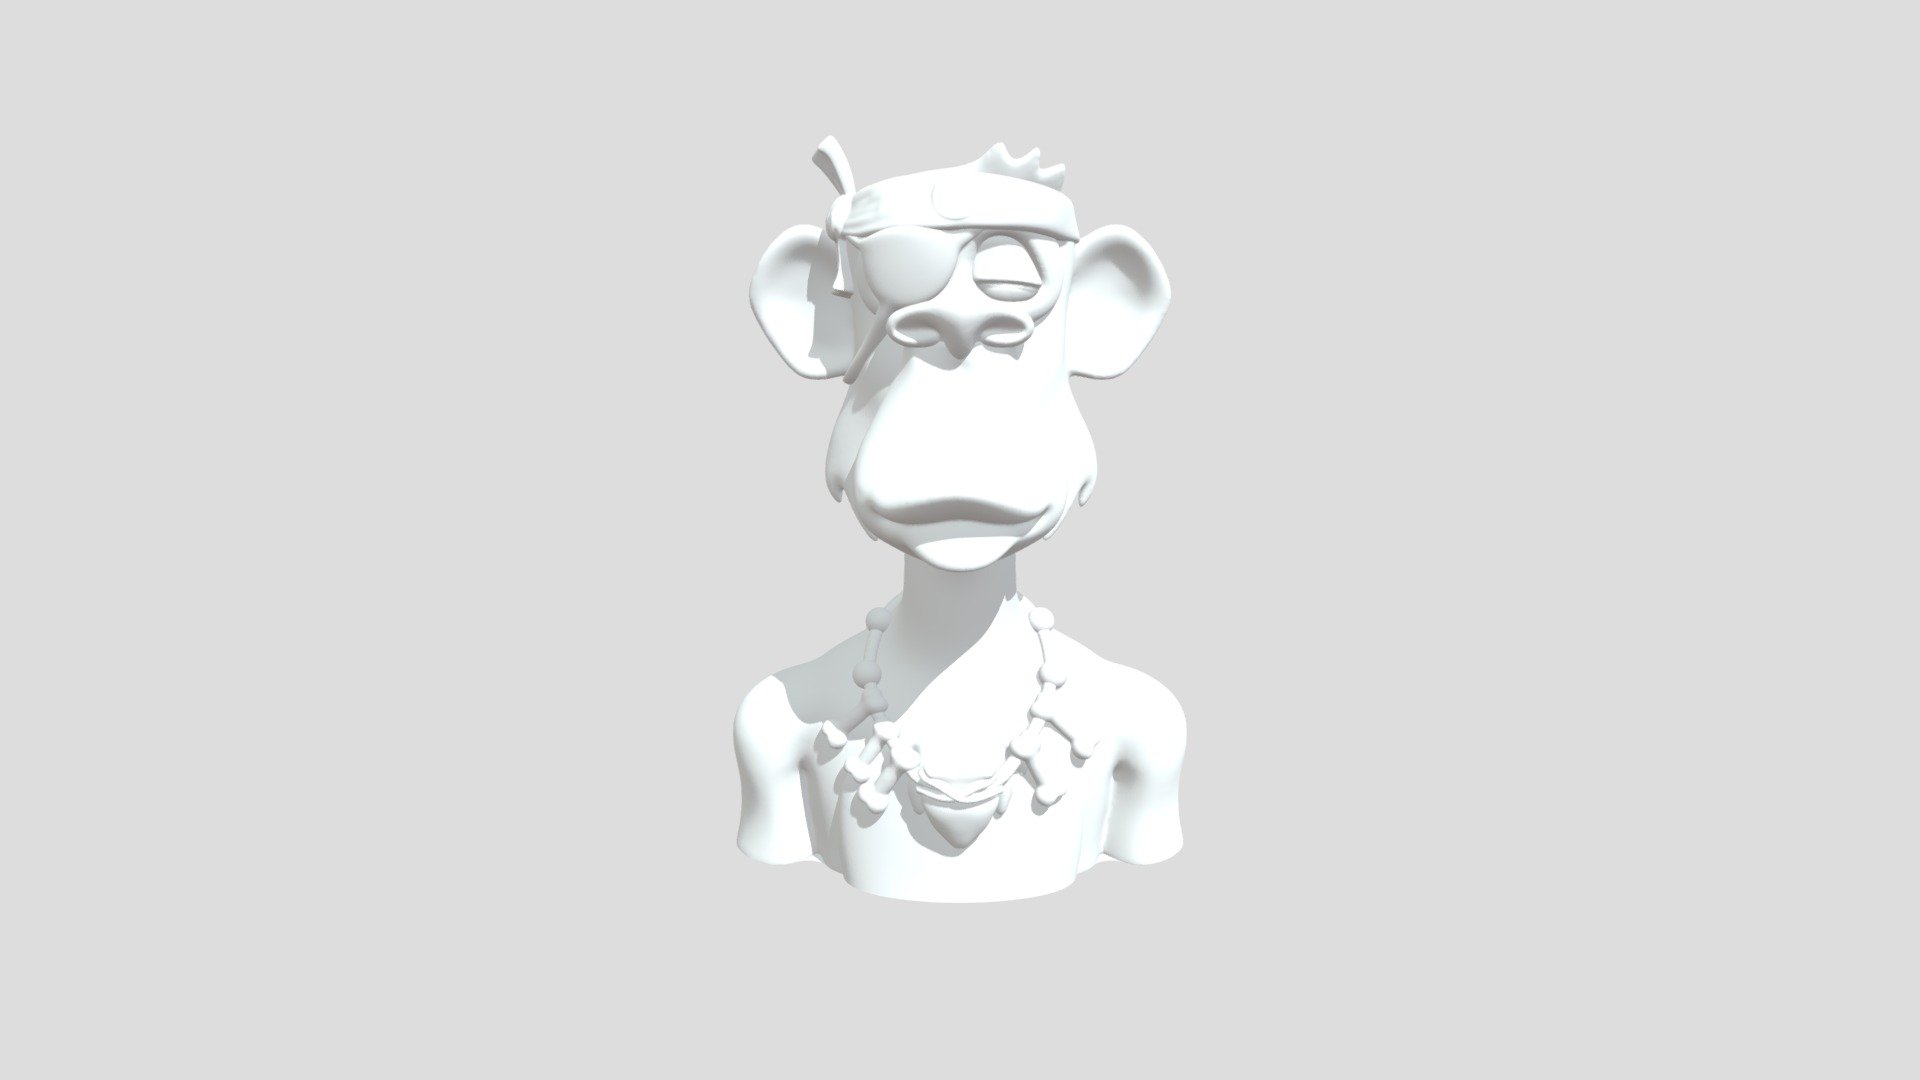 3D model inspired by the Bored Ape Yacht Club collection.

Properties:


Clothes: bone necklace
Earring: none
Eyes: eyepatch
Hat: sushi chef headband
Mouth: phoneme ooo
 - Bored Ape Bust - EYEPATCH INDIAN - 3D model by osvaldofilho3d 3d model